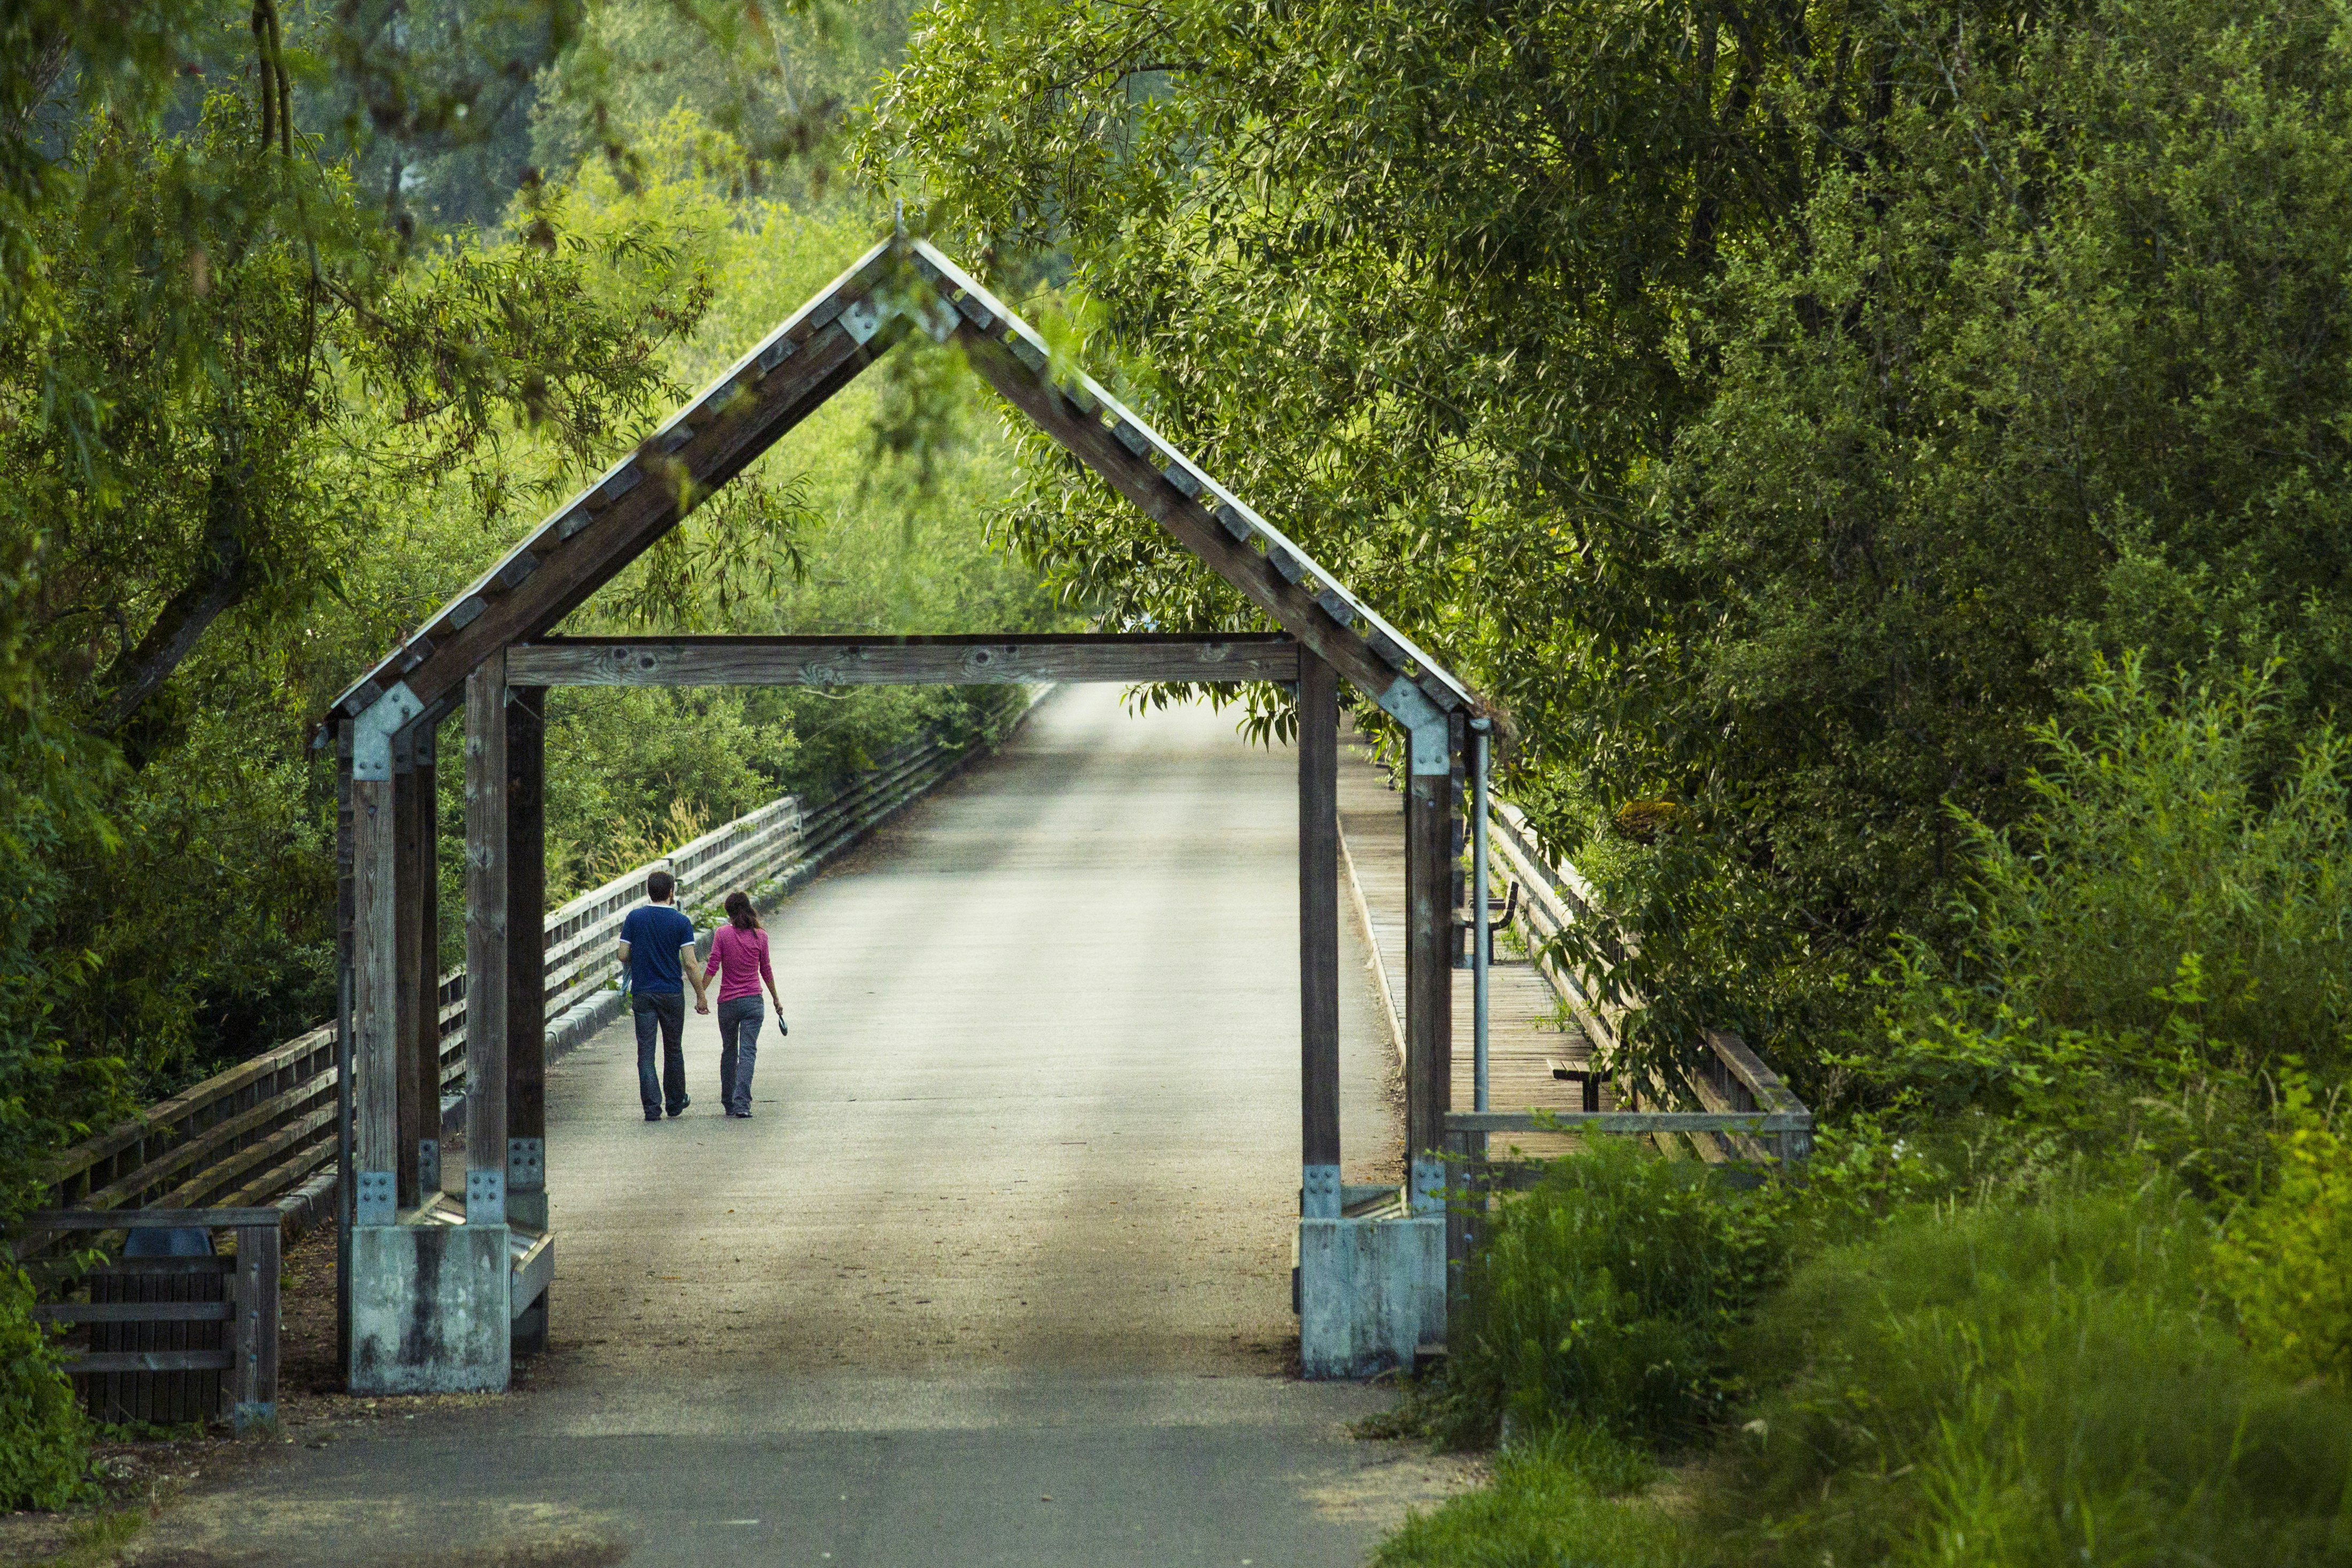 A man in a blue t-shirt and jeans and a woman in a pink t-shirt and jeans walk hand and hand down a paved trail in Juanita Bay Park in Kirkland, Washington, surrounded by green trees on either side of a long fence of wooden rails. In the immediate forground is a gate made of wood beams and metal joists in the outline of a house like a child might draw, with square walls and a triangle roof